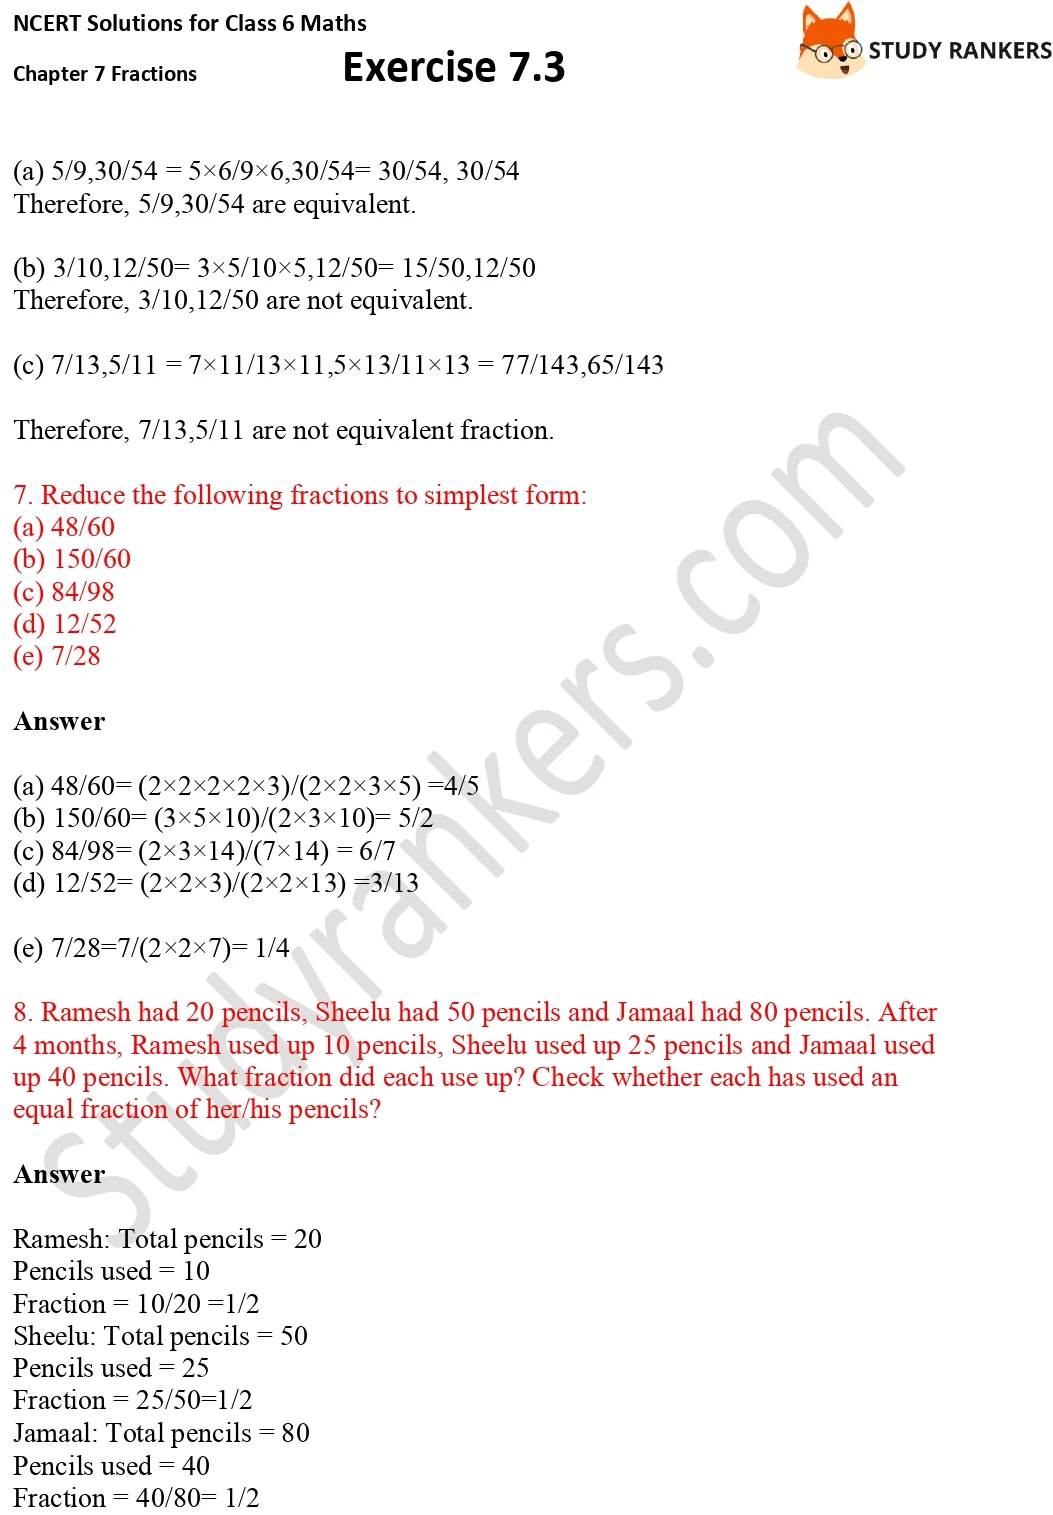 NCERT Solutions for Class 6 Maths Chapter 7 Fractions Exercise 7.3 Part 3